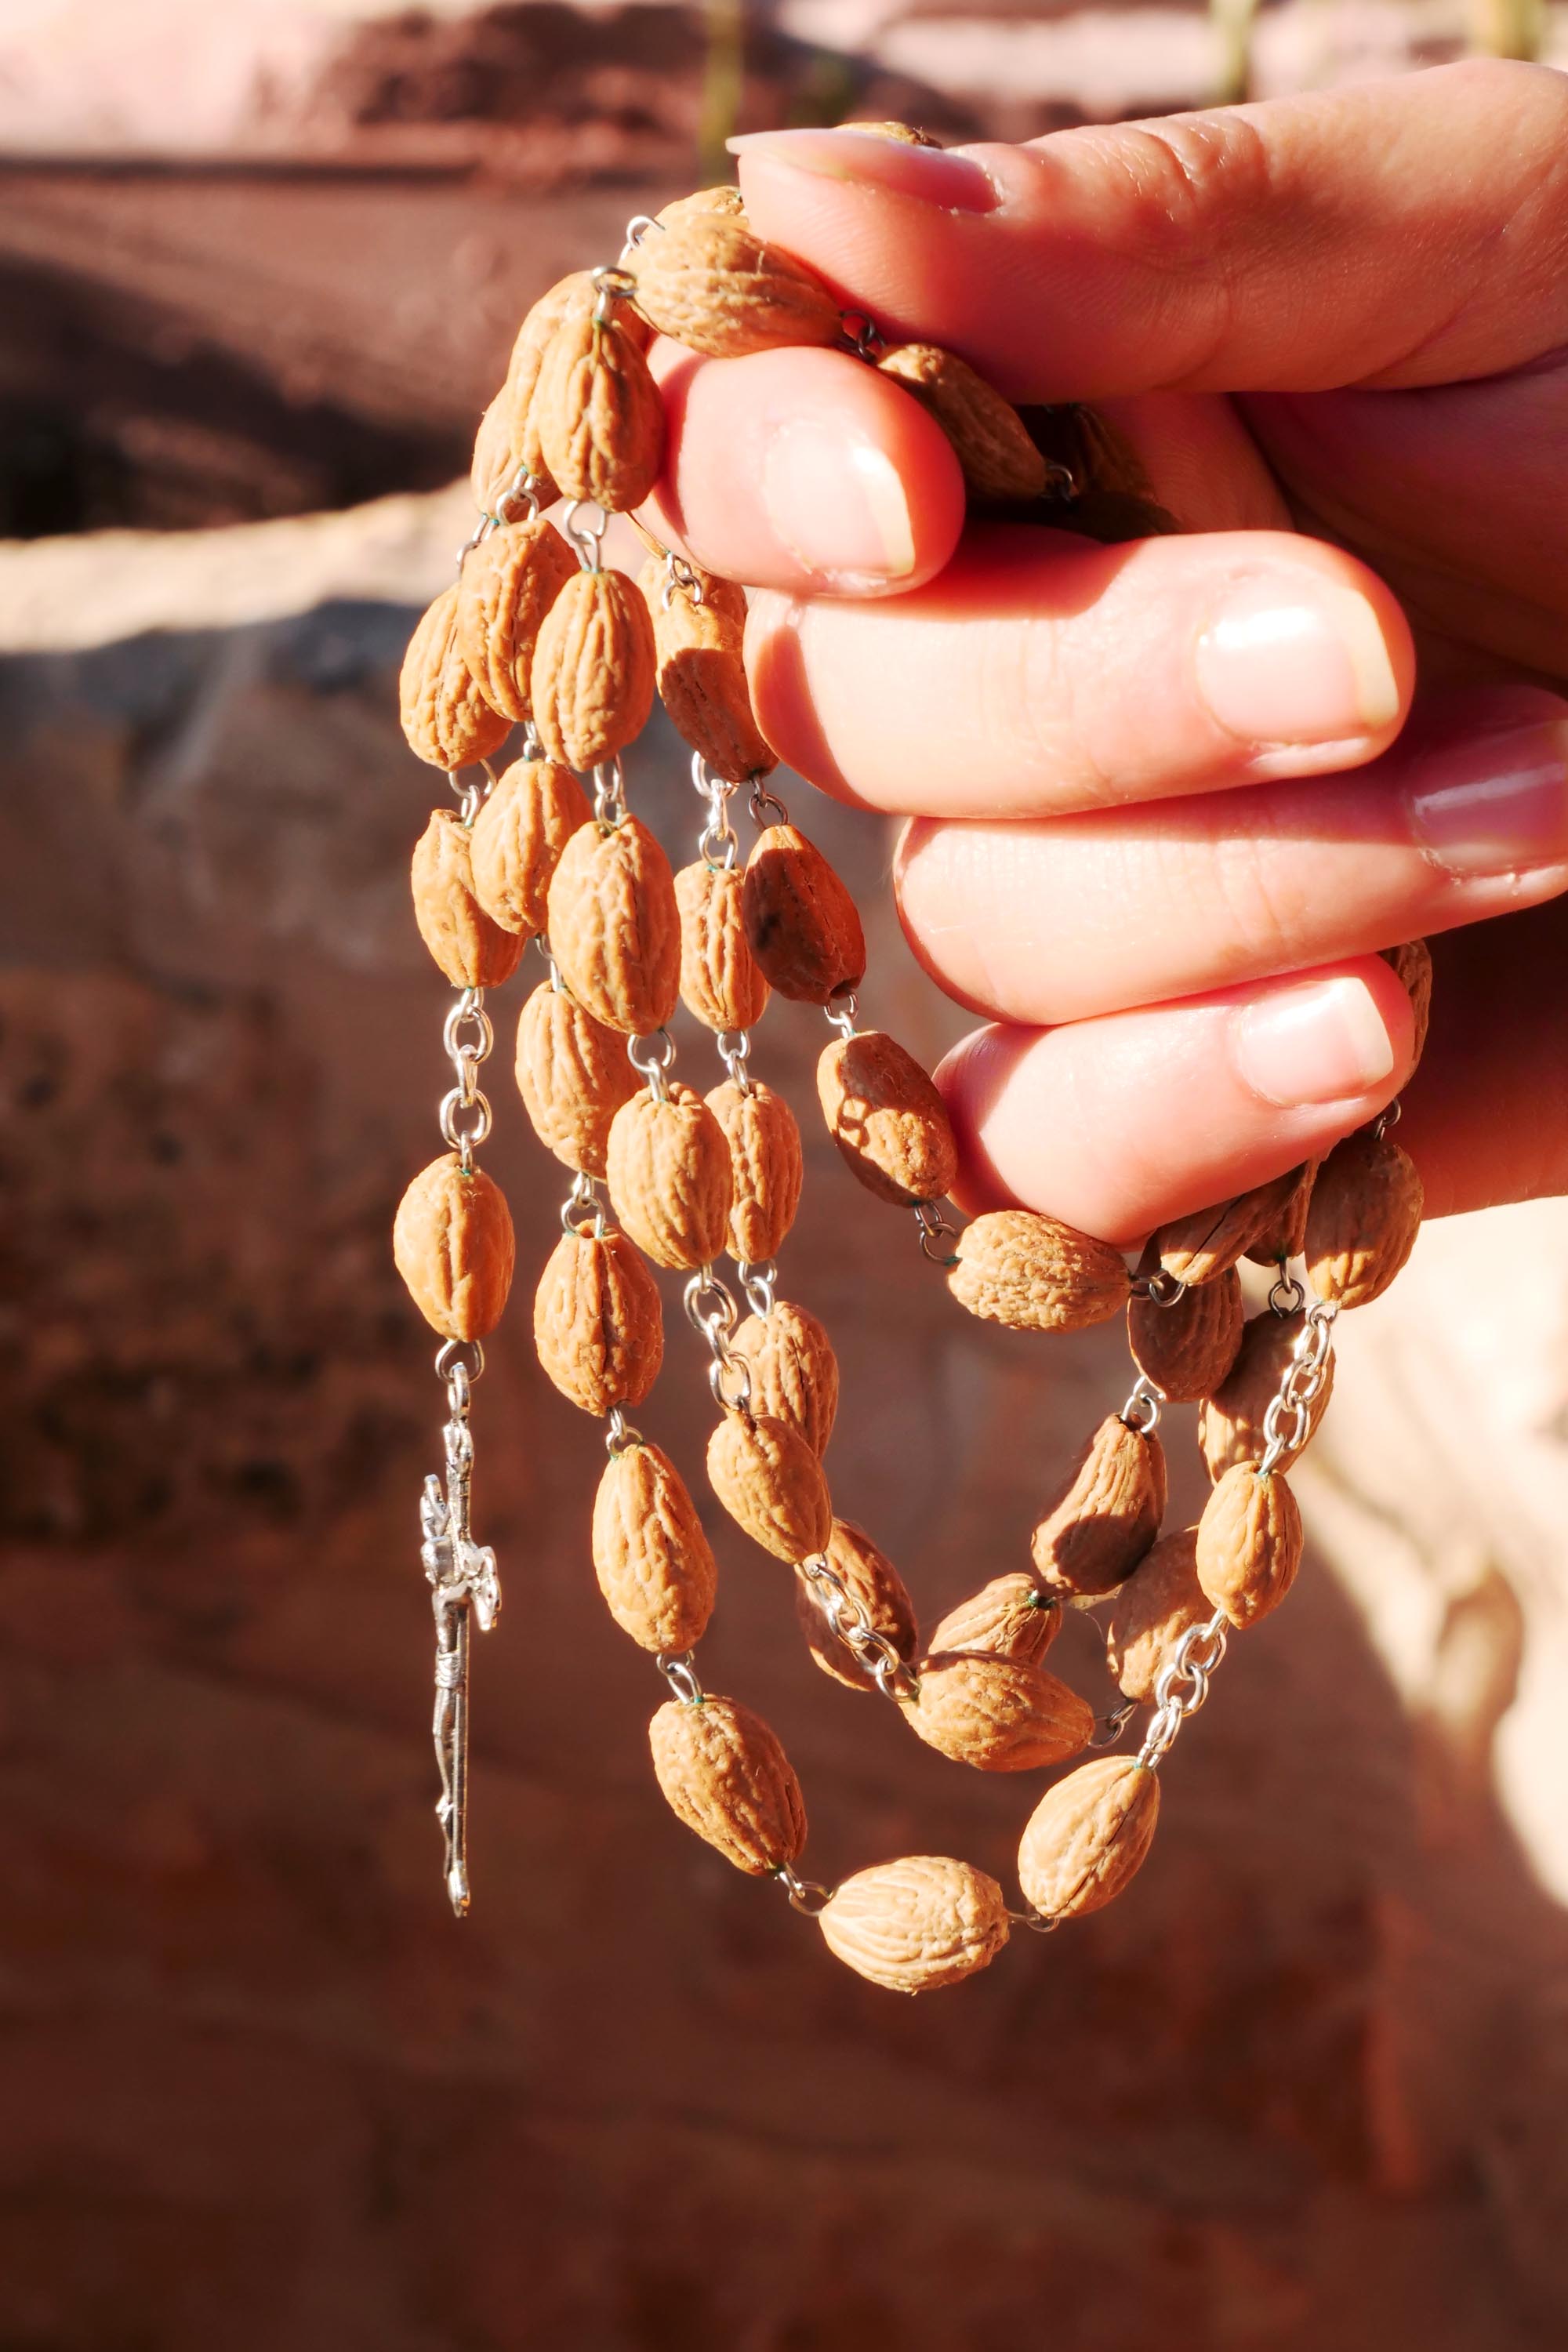 Bound to Heaven Olive Seed Christian Rosary With original Bethlehem Soil